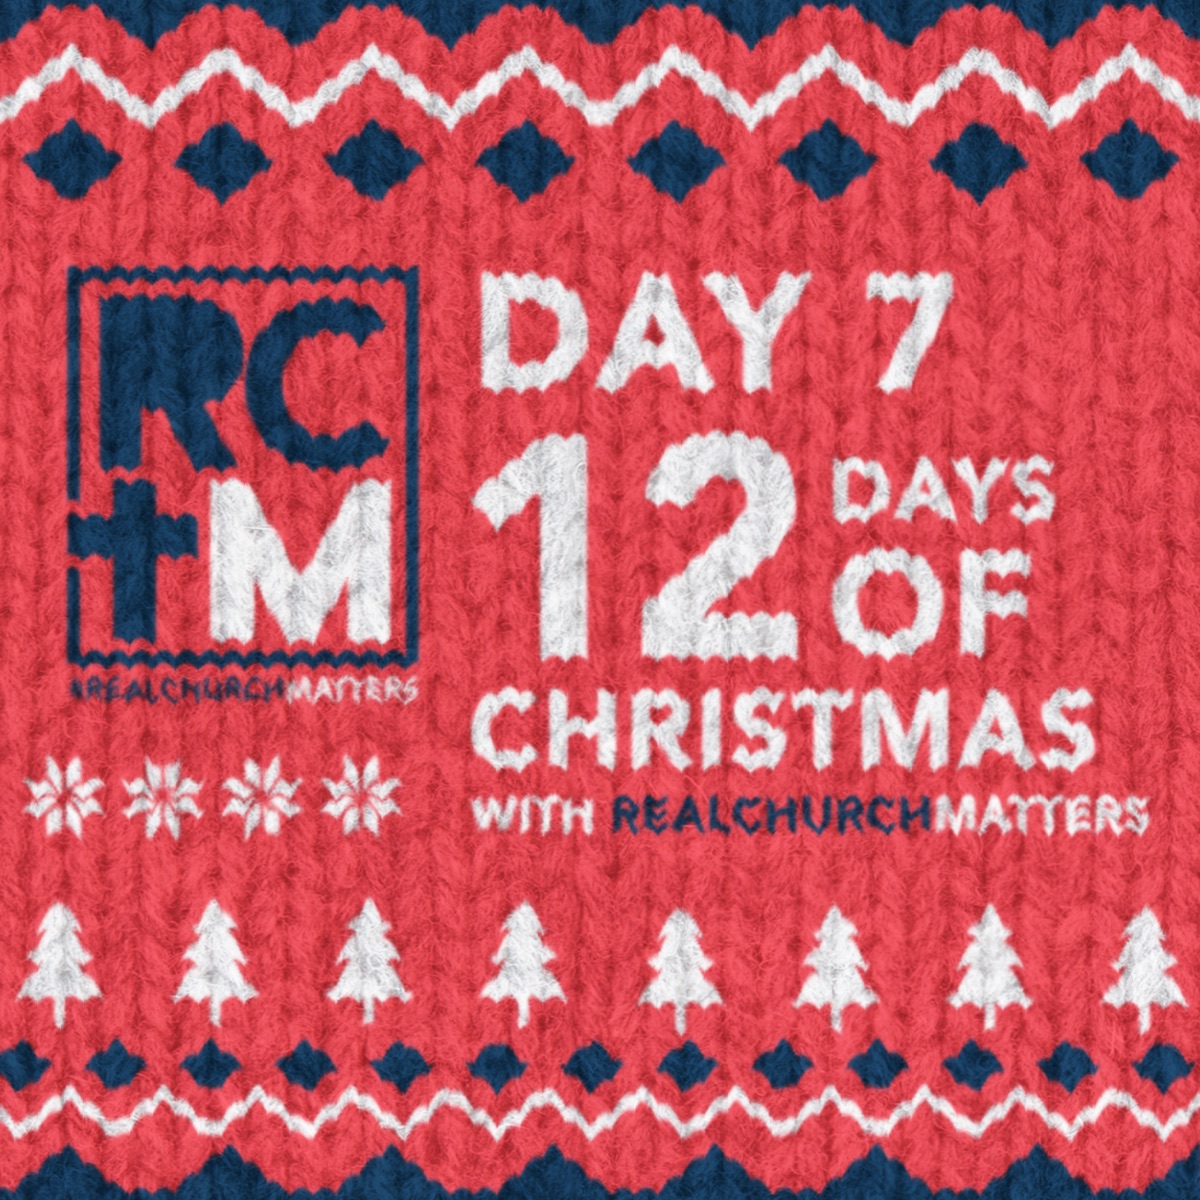 Day 7 of the 12 Days of Christmas with Real Church Matters